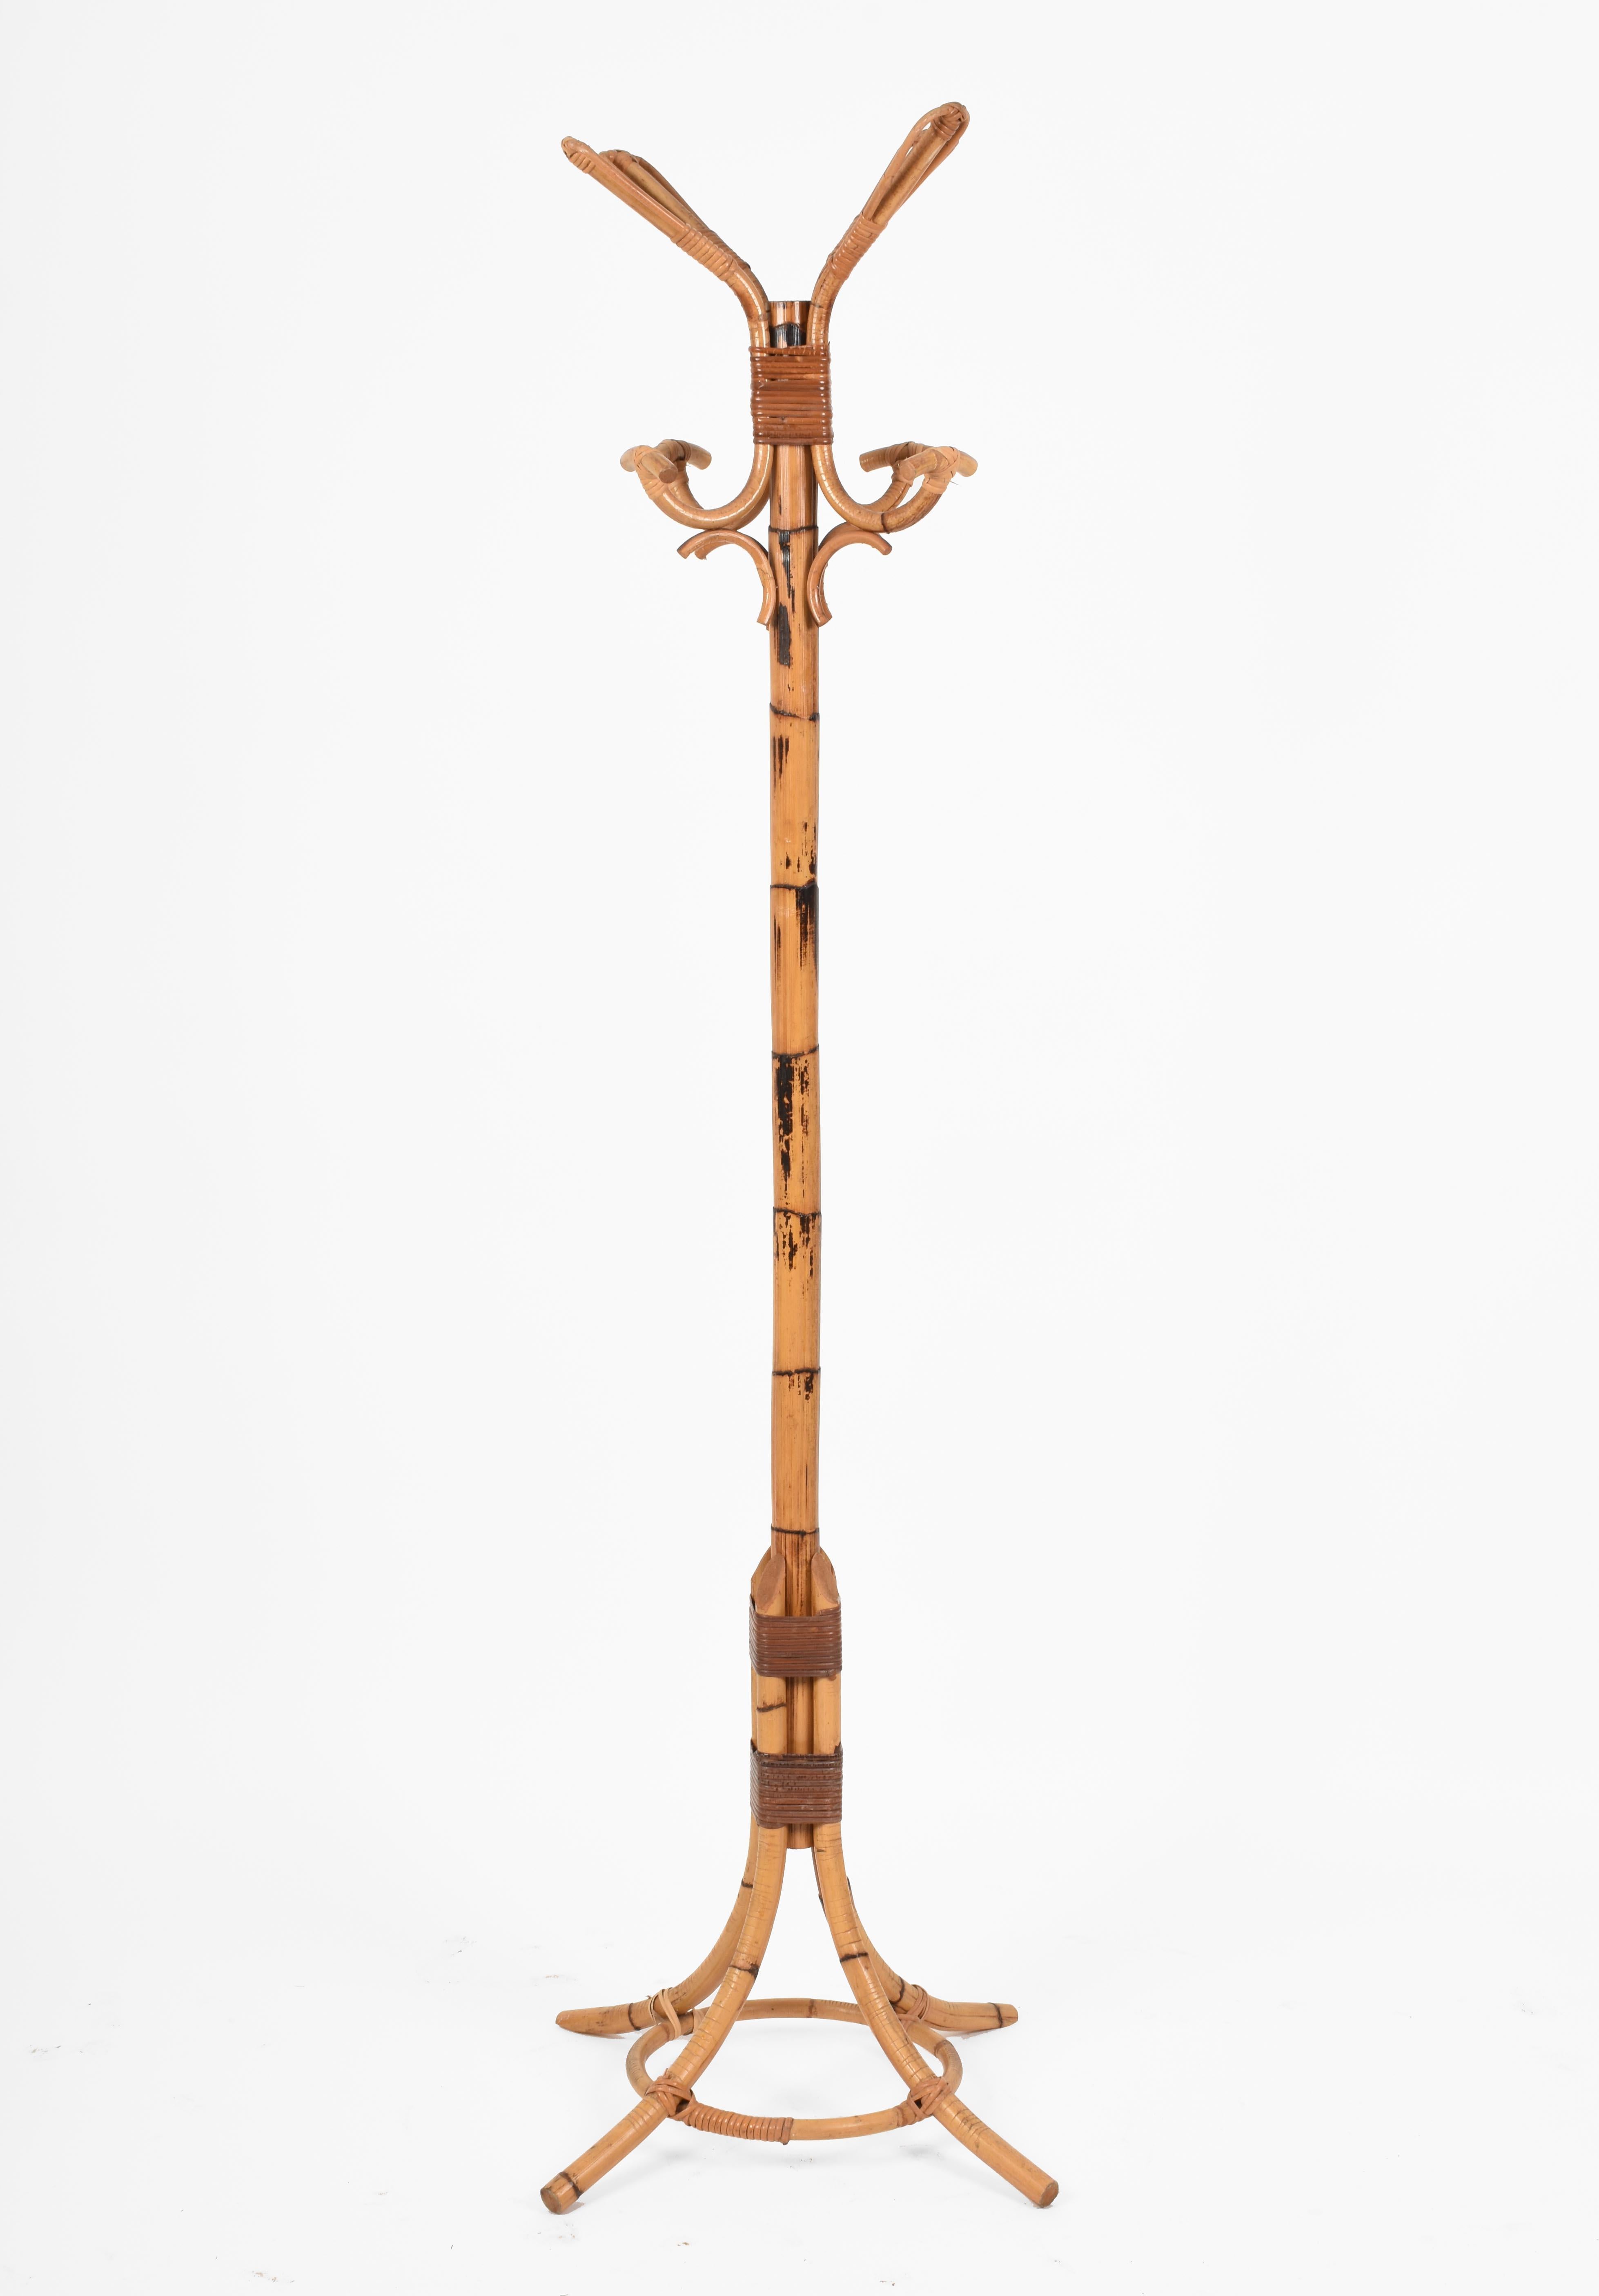 Amazing midcentury bamboo coat stand. This amazing piece was produced in Italy during the 1970s.

The composition and the mix of bamboo and rattan are just spectacular, with the use of these materials both for decorative and structural